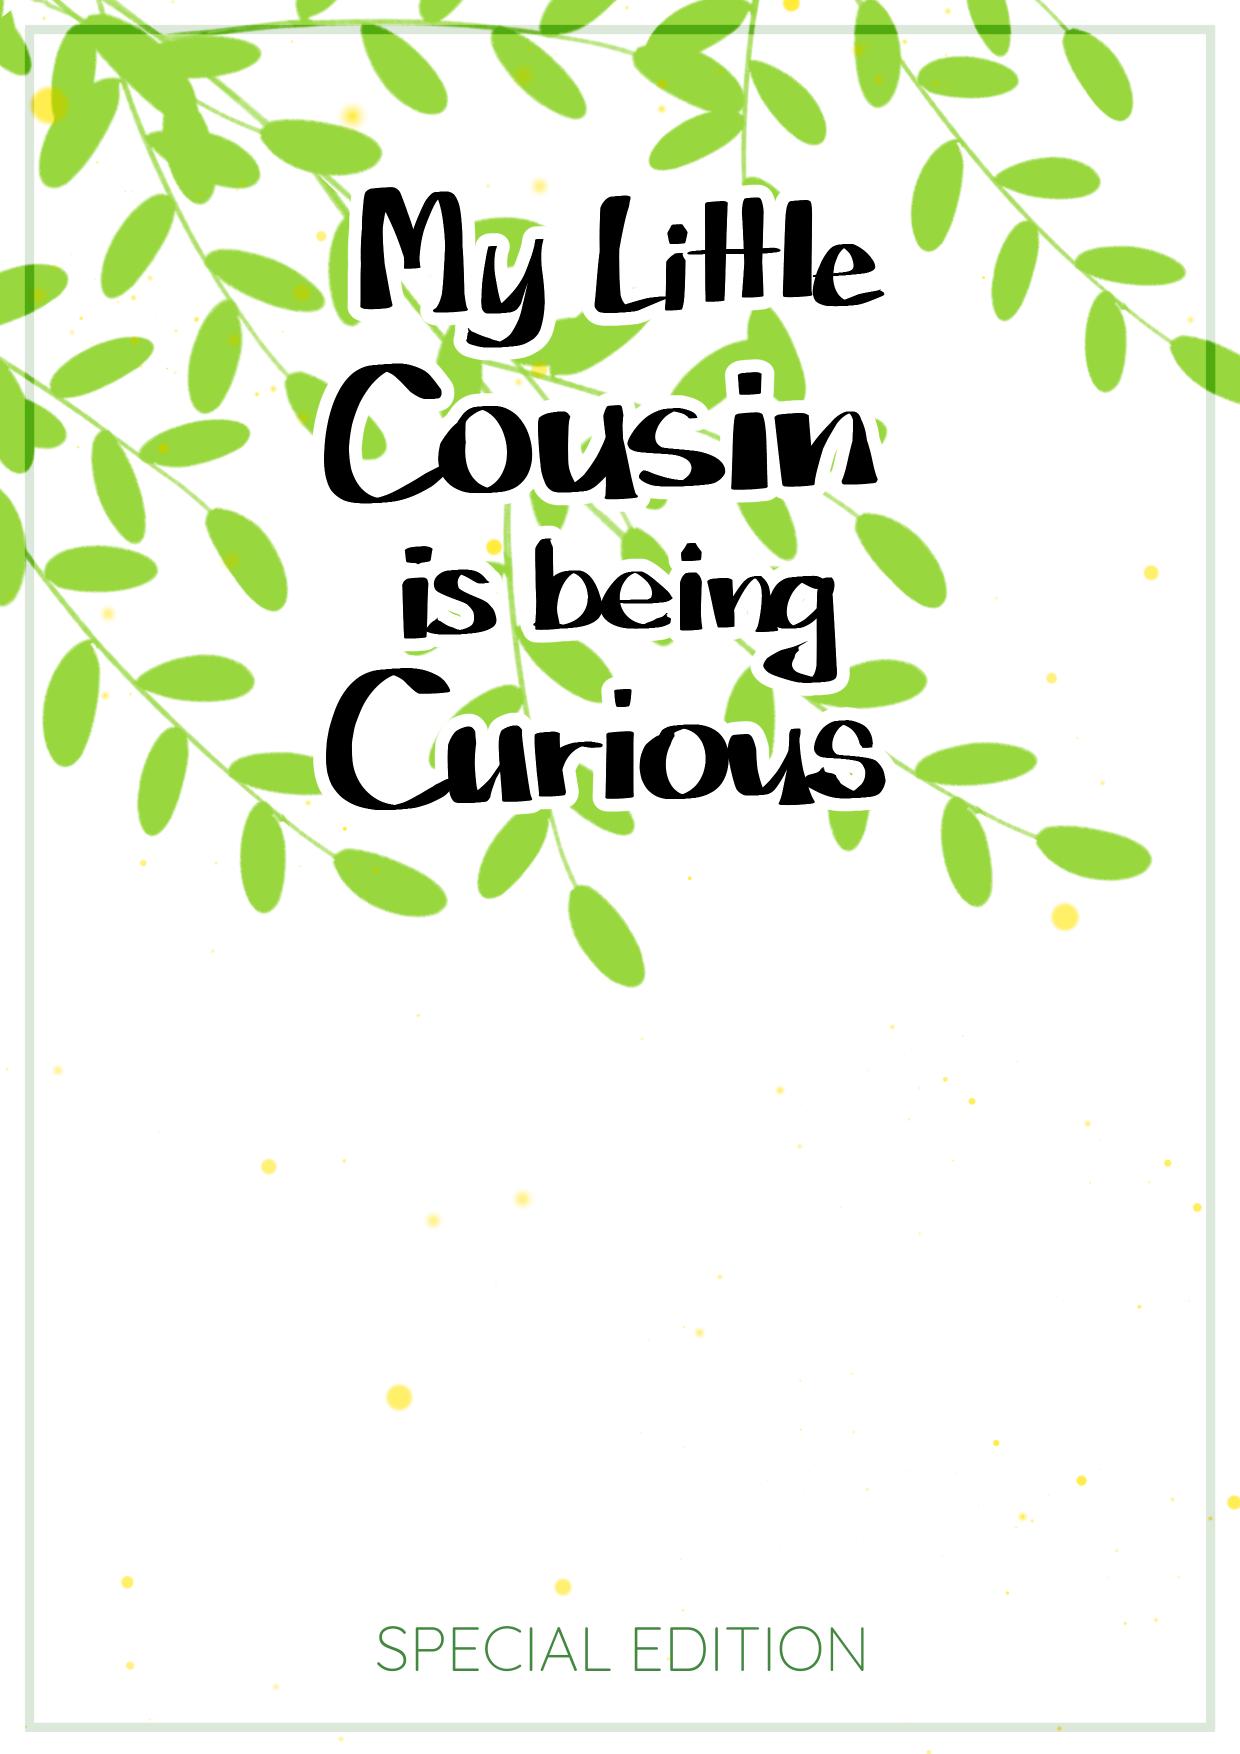 My little cousin is being curious - Extra 4